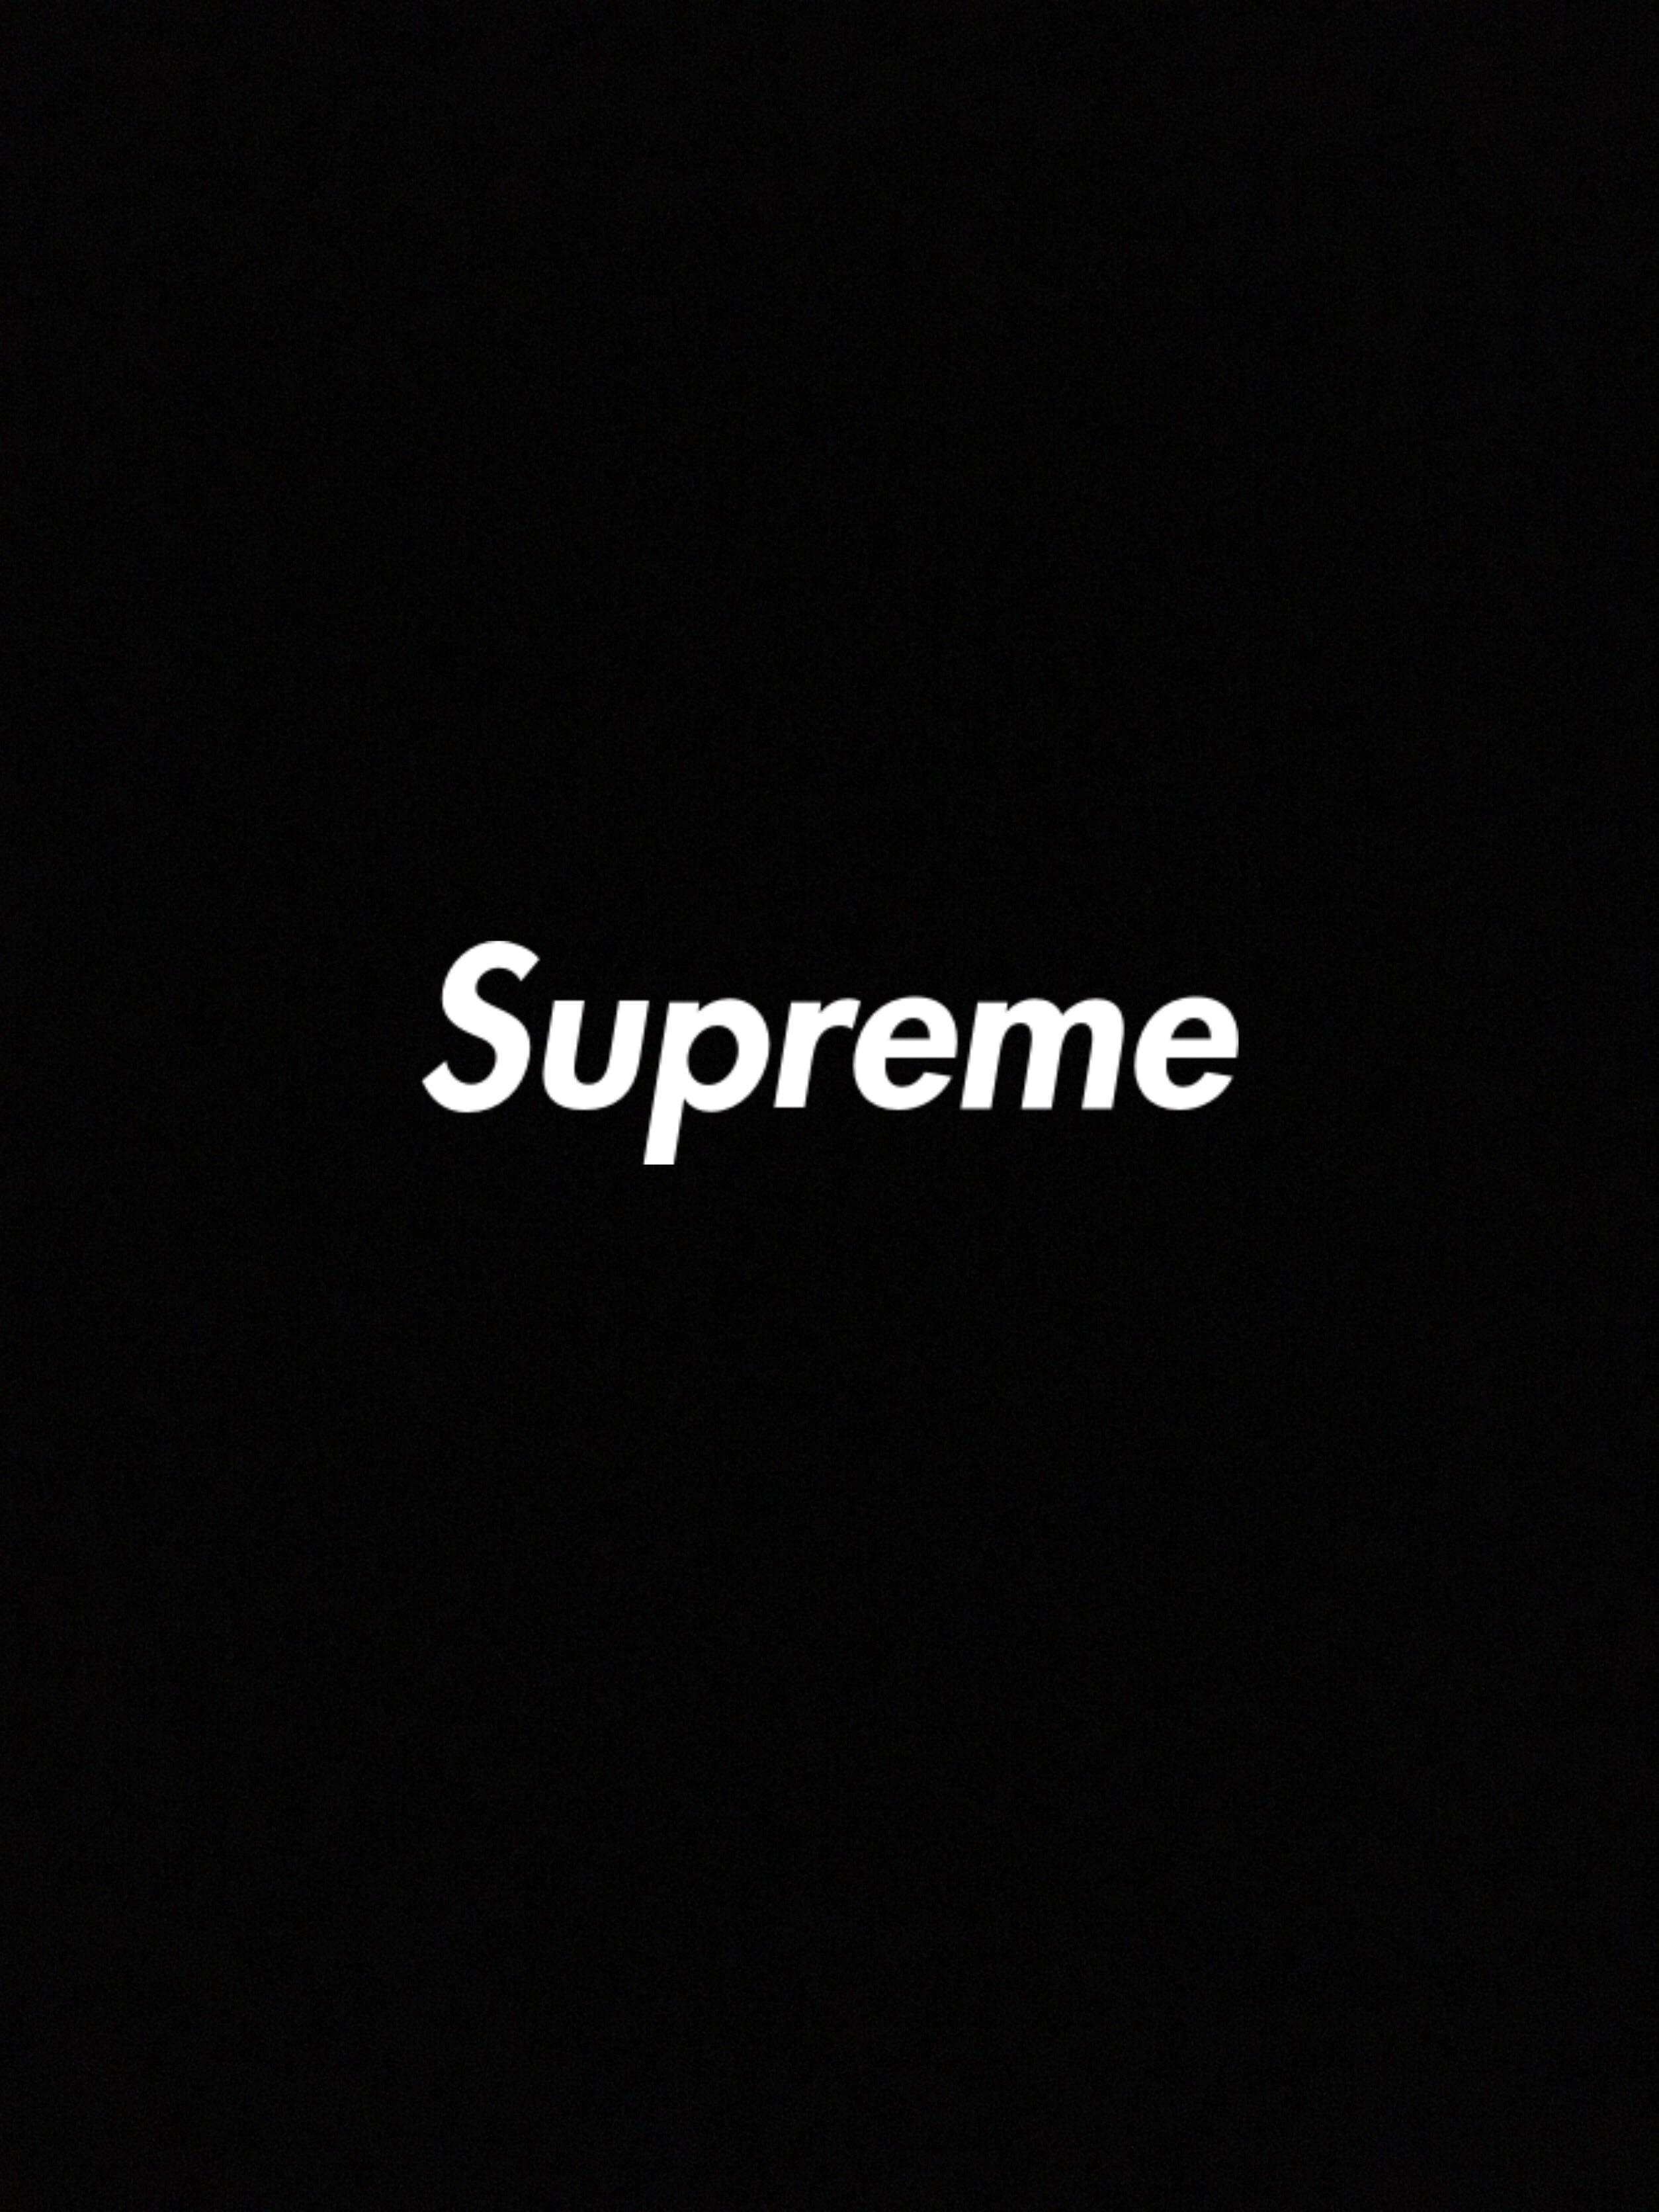 made a very simple supreme BLACK iPhone wallpaper